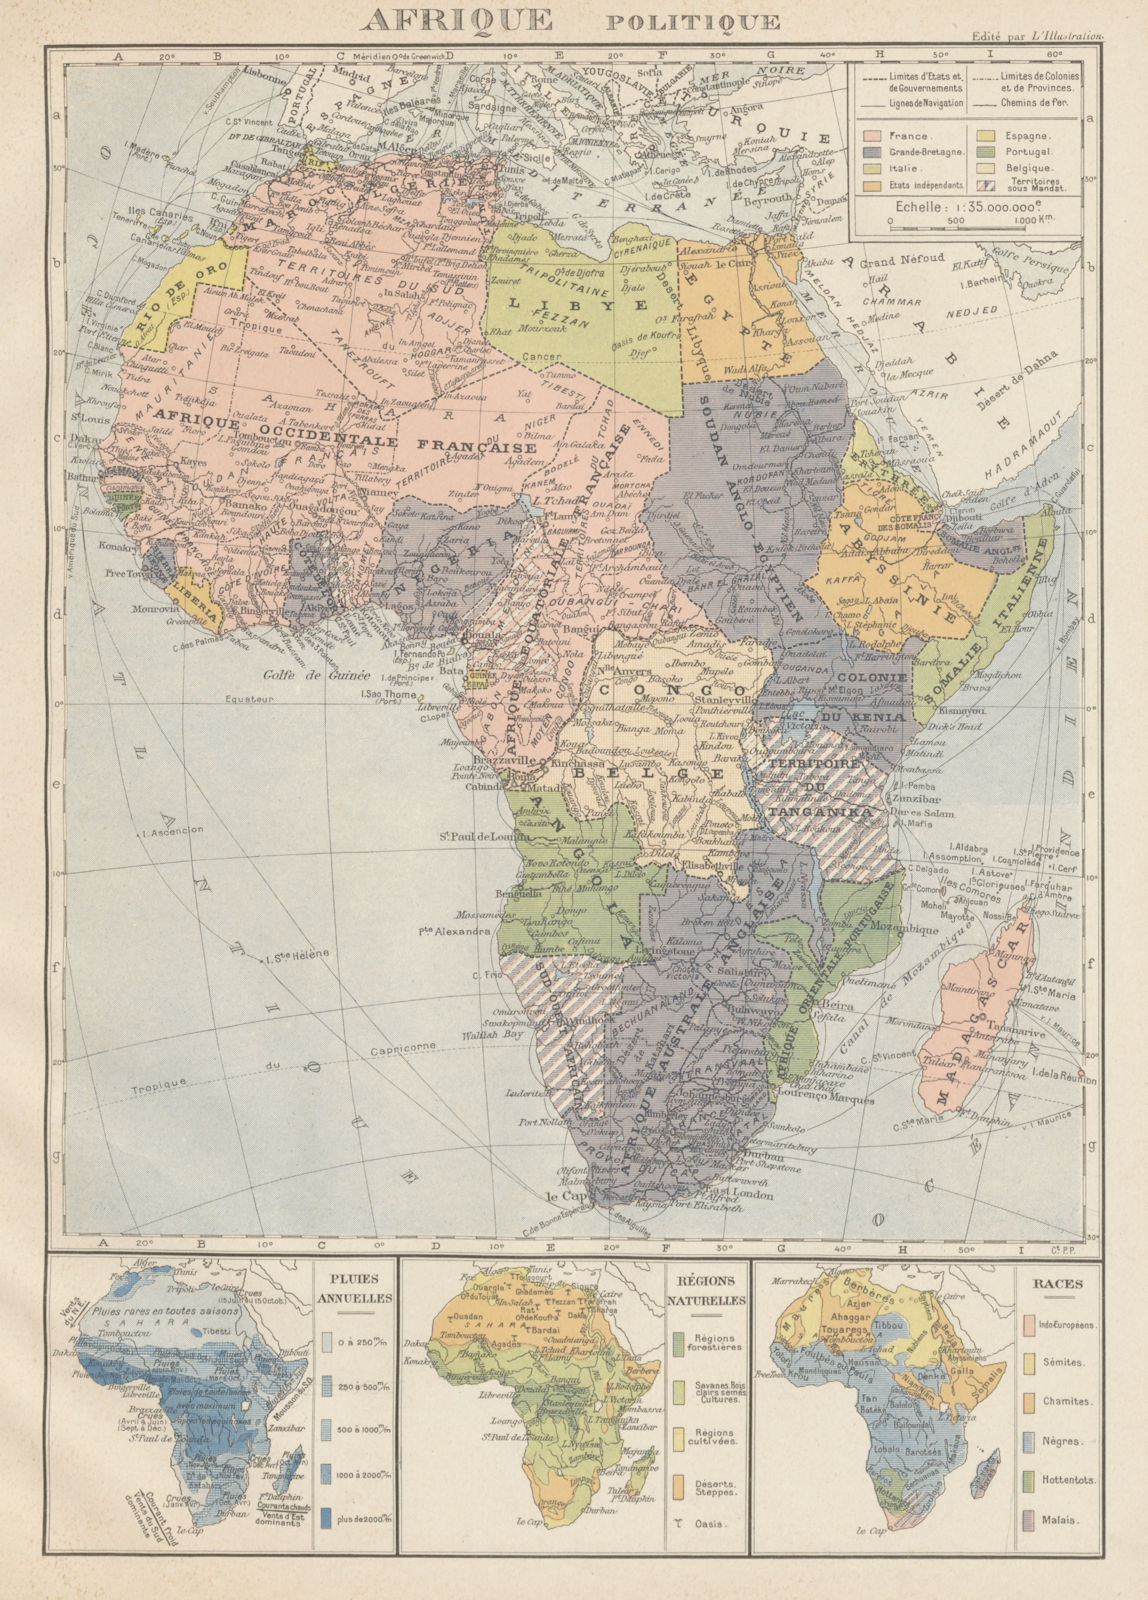 COLONIAL AFRICA Afrique. League of Nations Mandates. Ethnicity 1929 old map